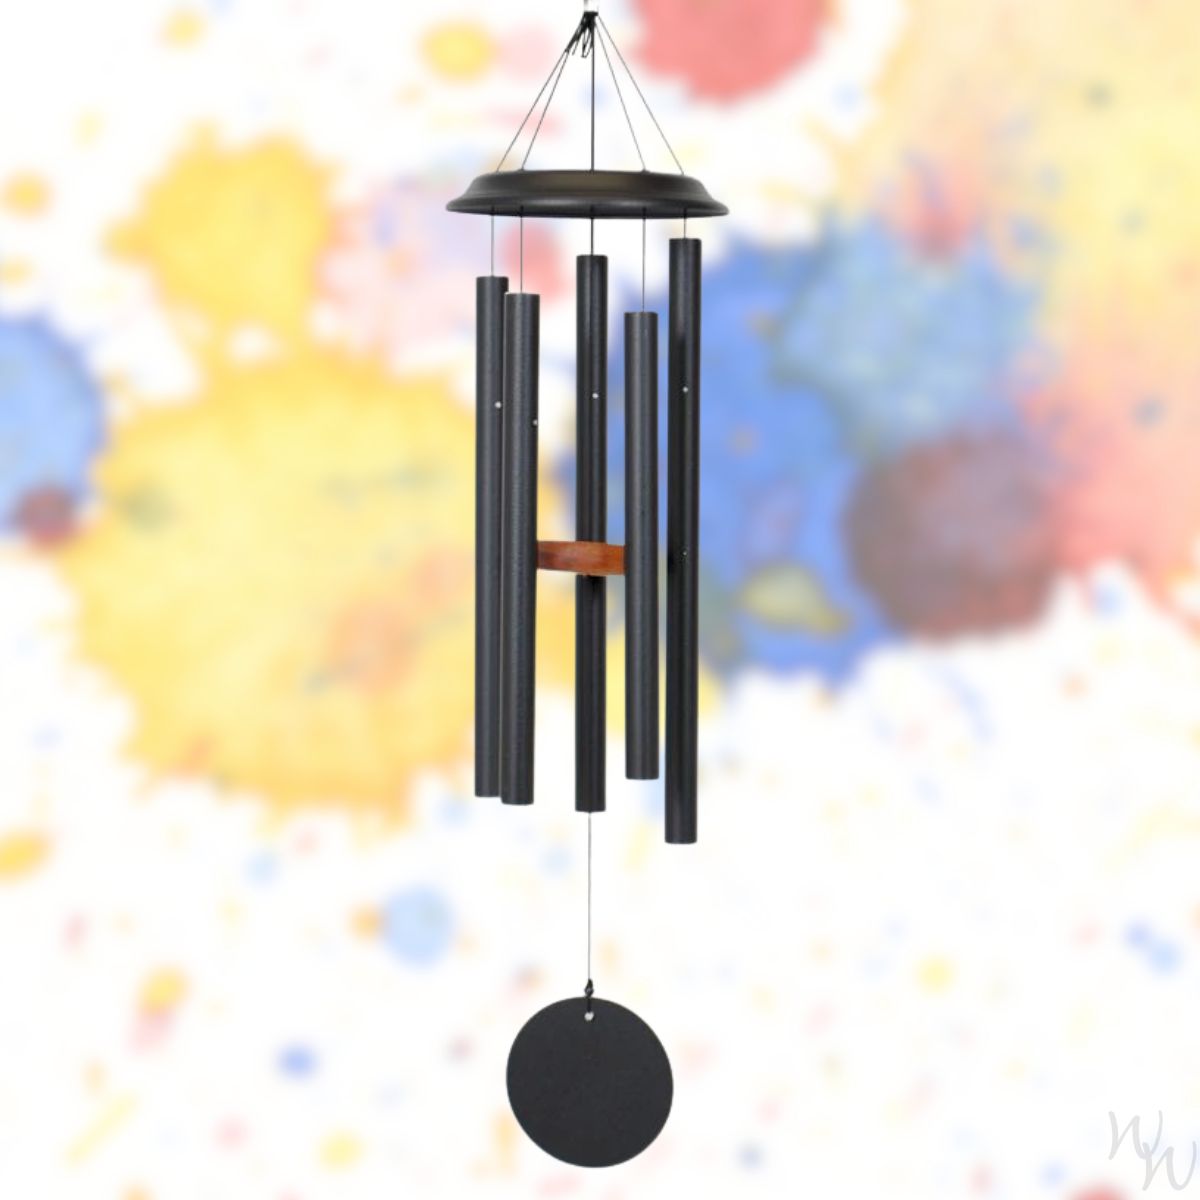 Shenandoah Melodies 35 Inch Black Wind Chime - Scale Of D